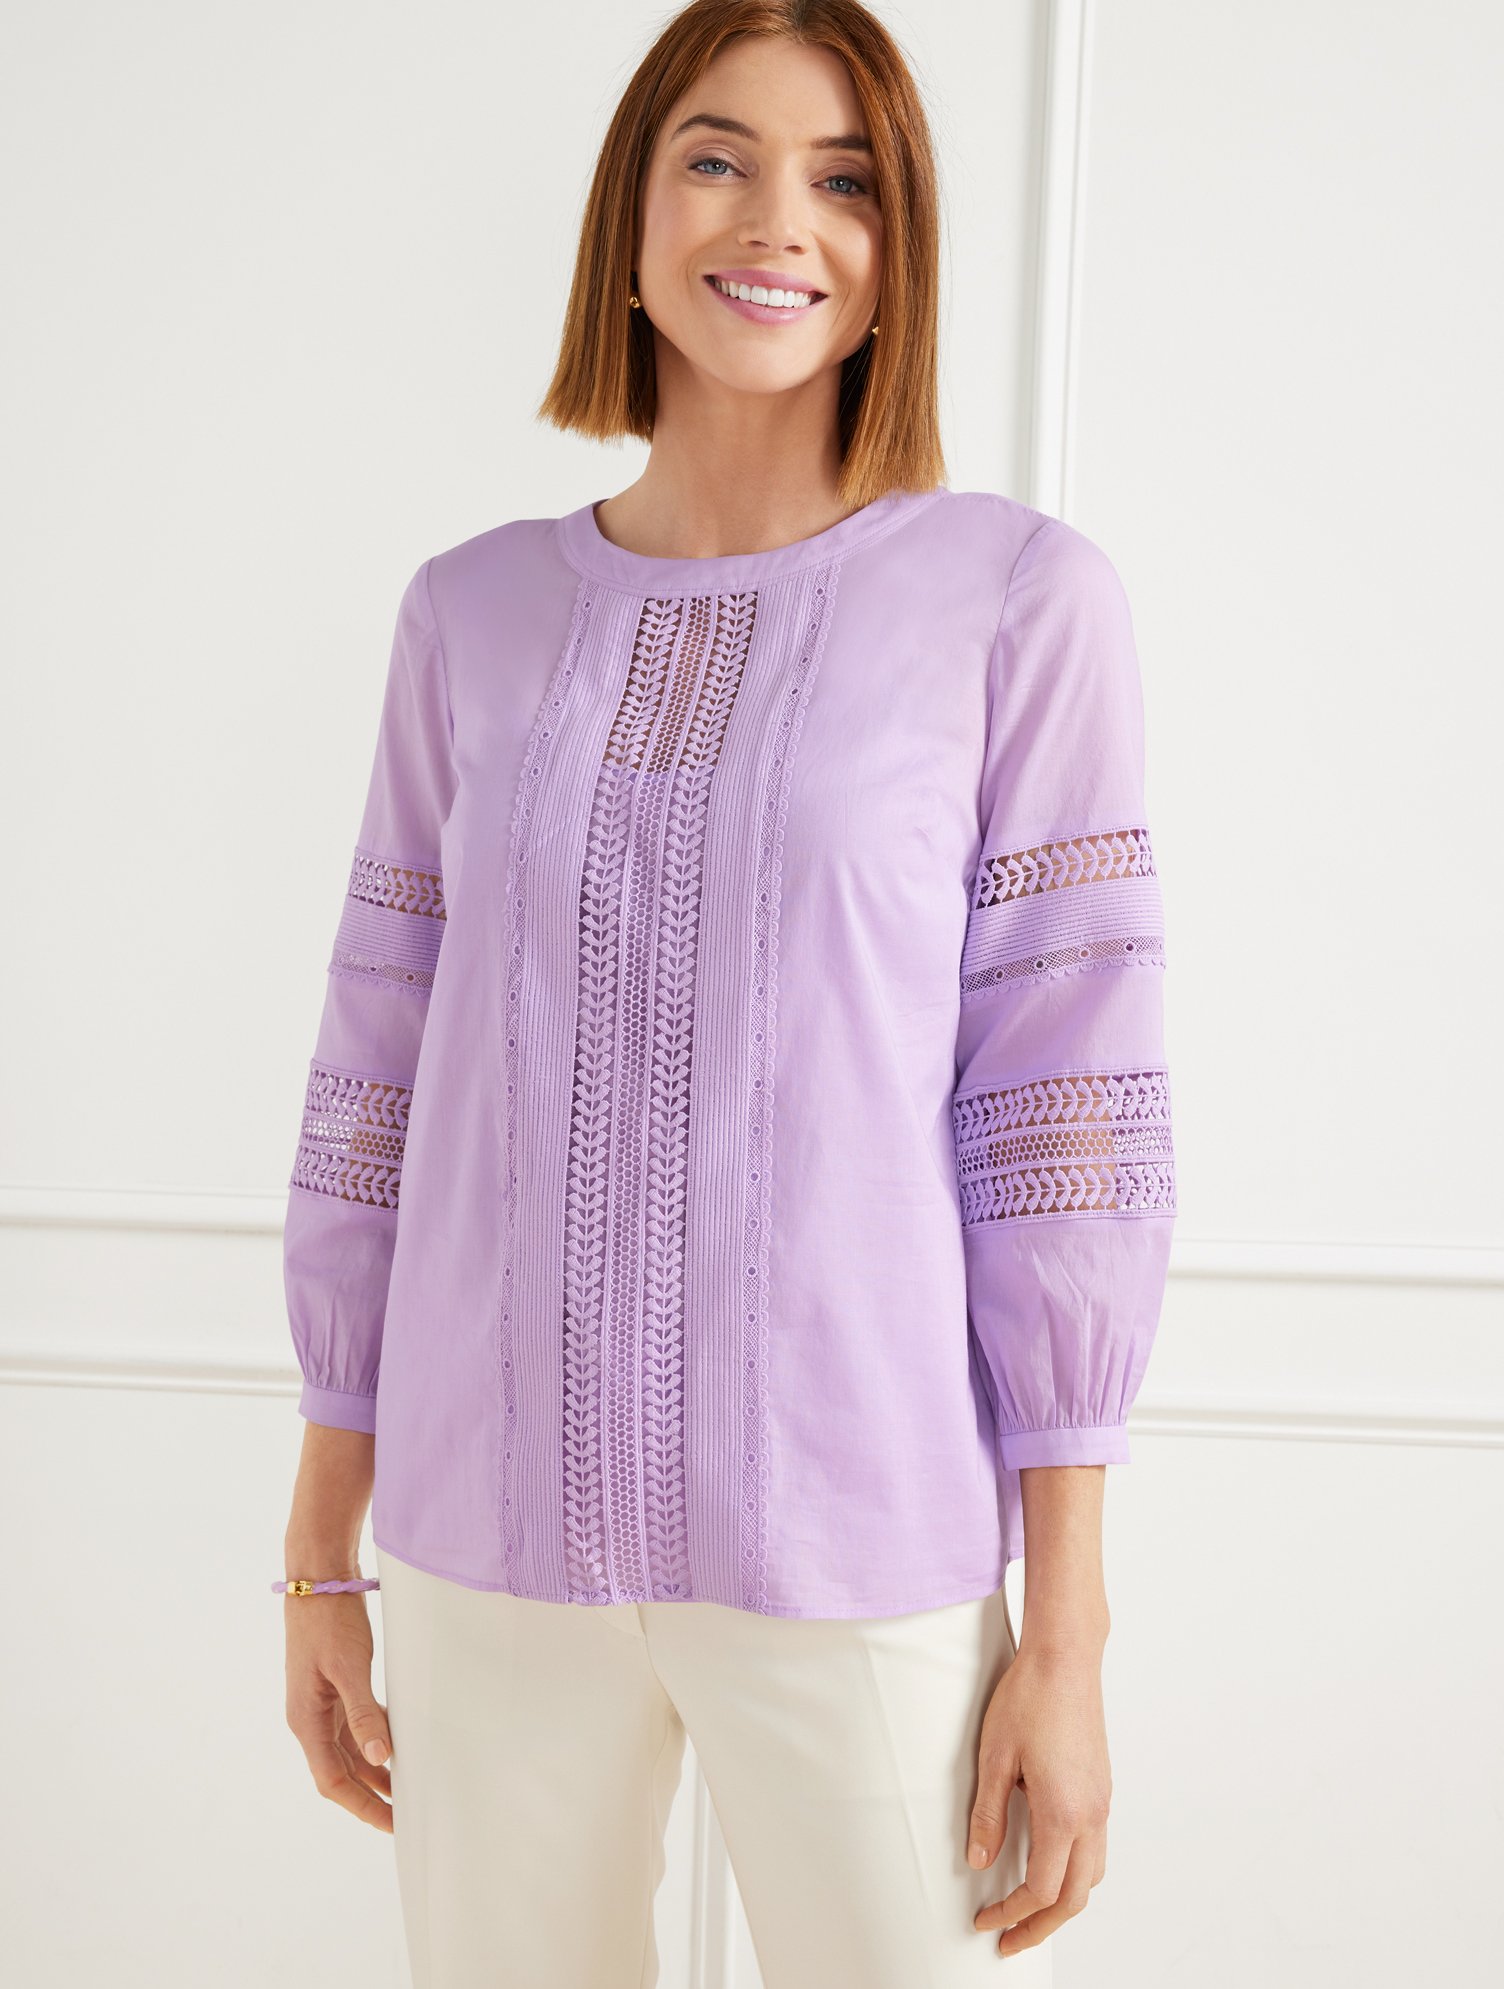 Talbots Plus Size - Embroidered Trim Top - Spring Lilac - 2x